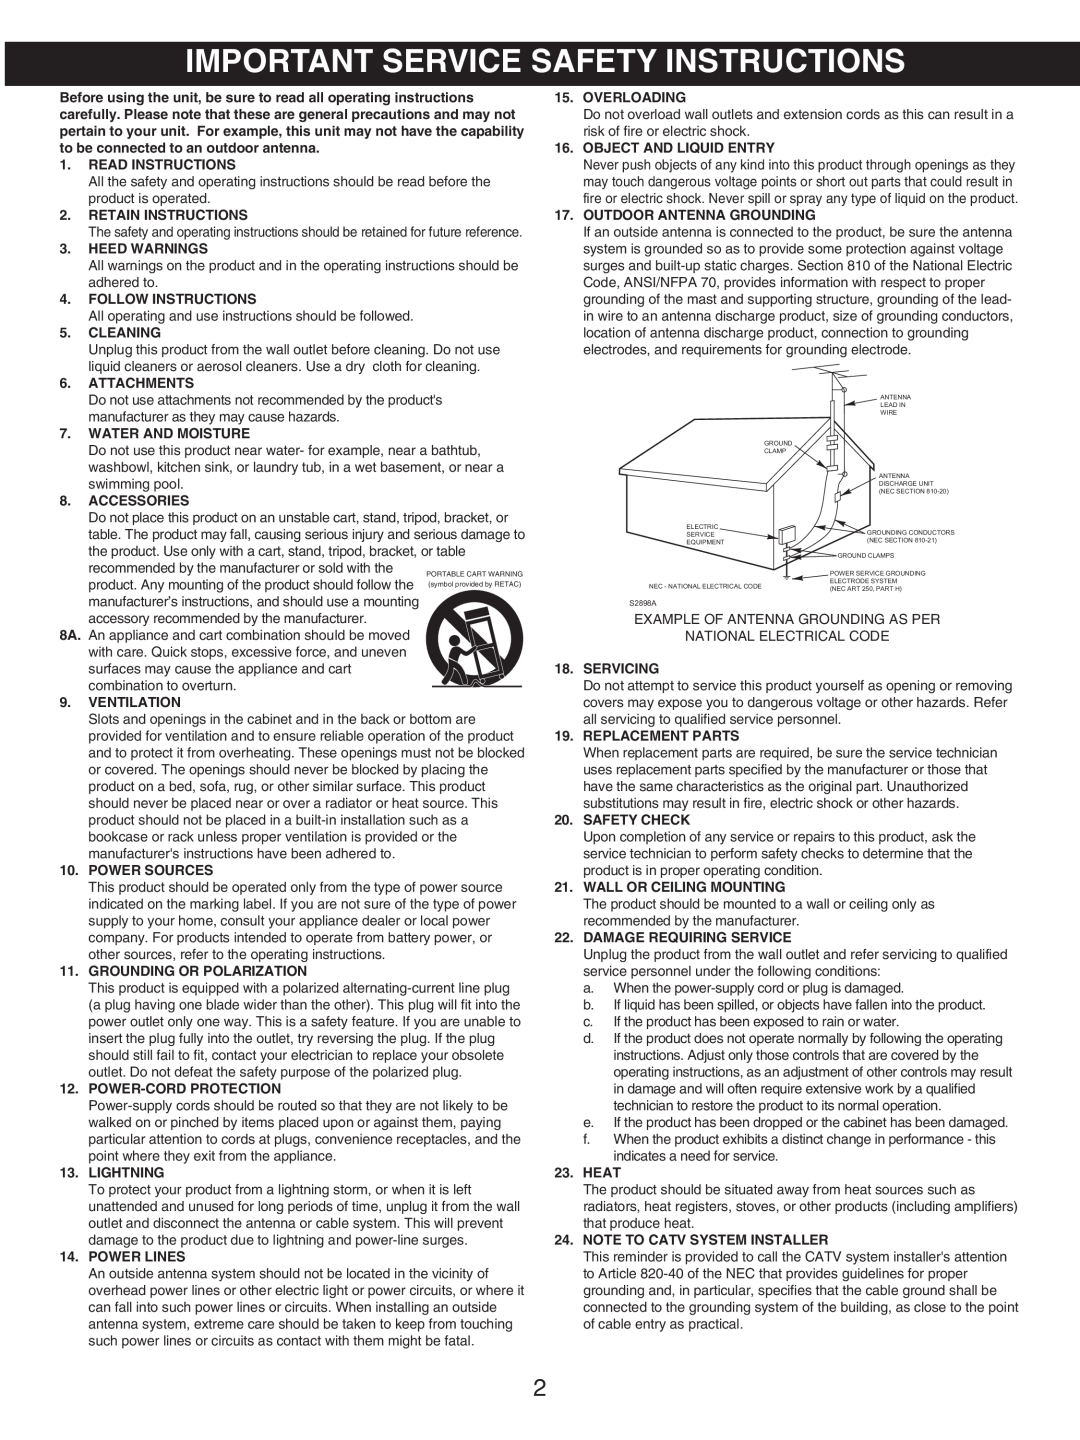 Memorex MX7300 manual Important Service Safety Instructions 